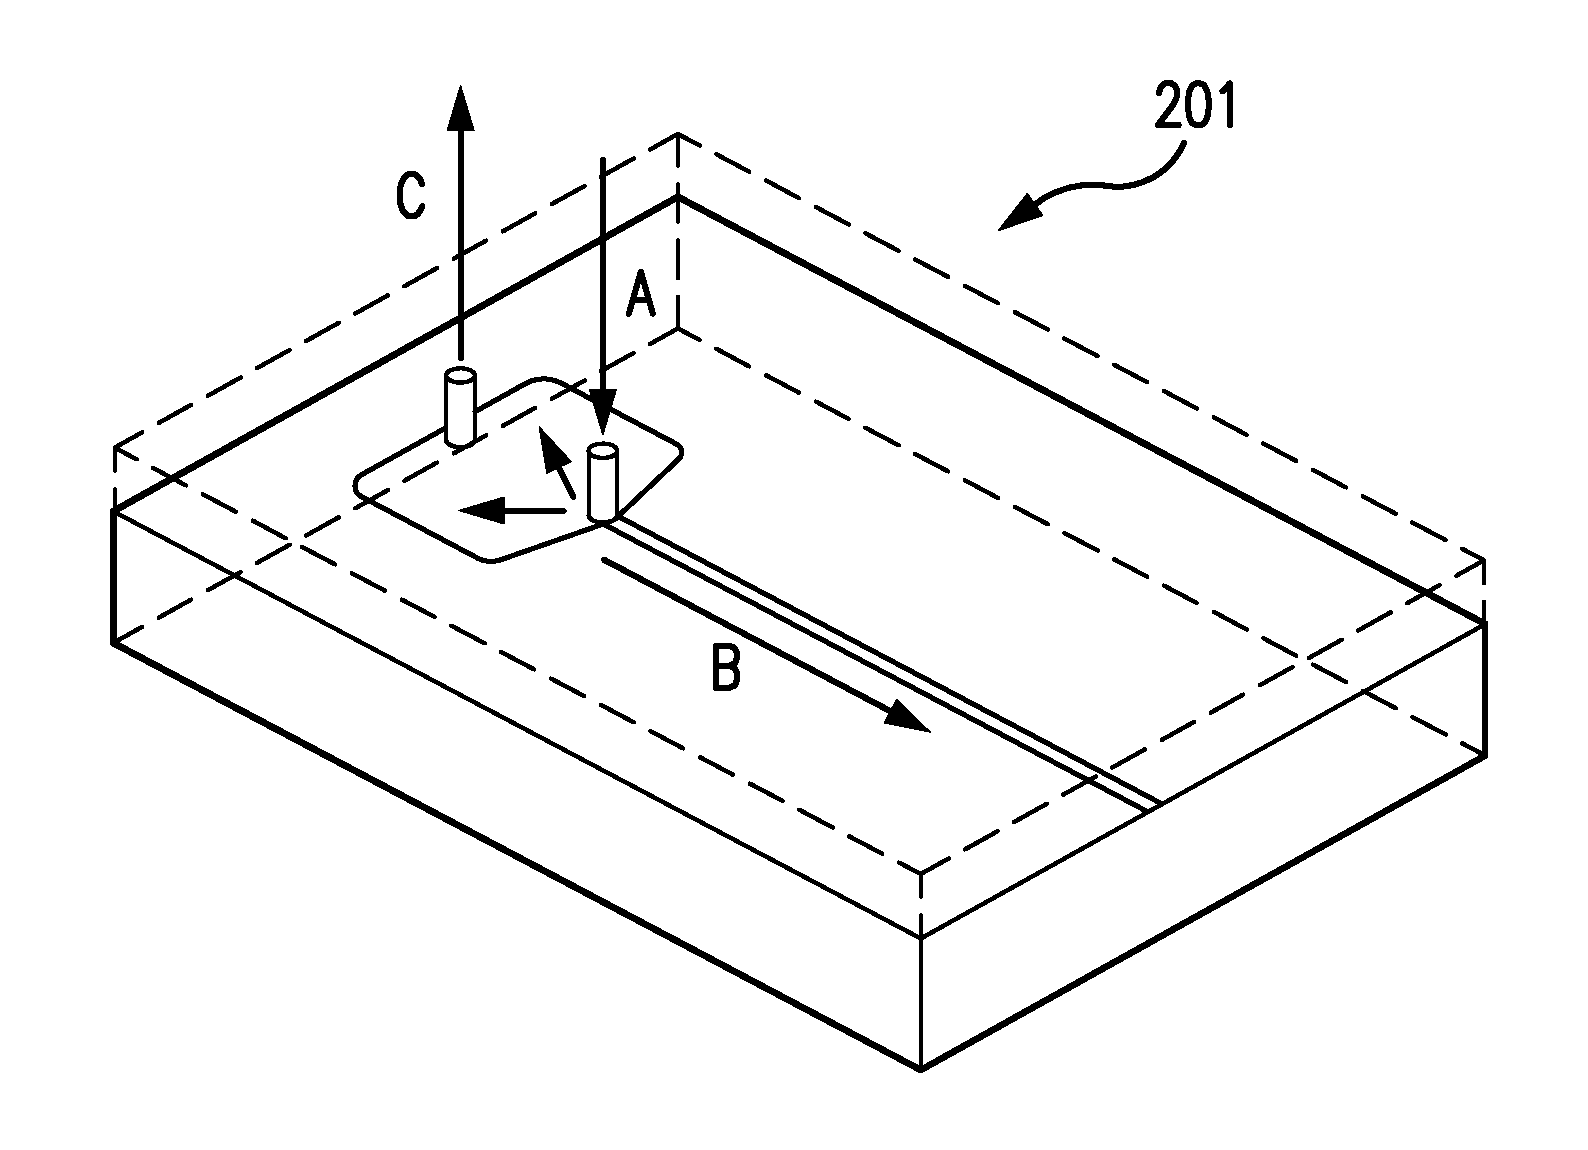 Systems and methods for minimization or elimination of diffusion effects in a microfluidic system